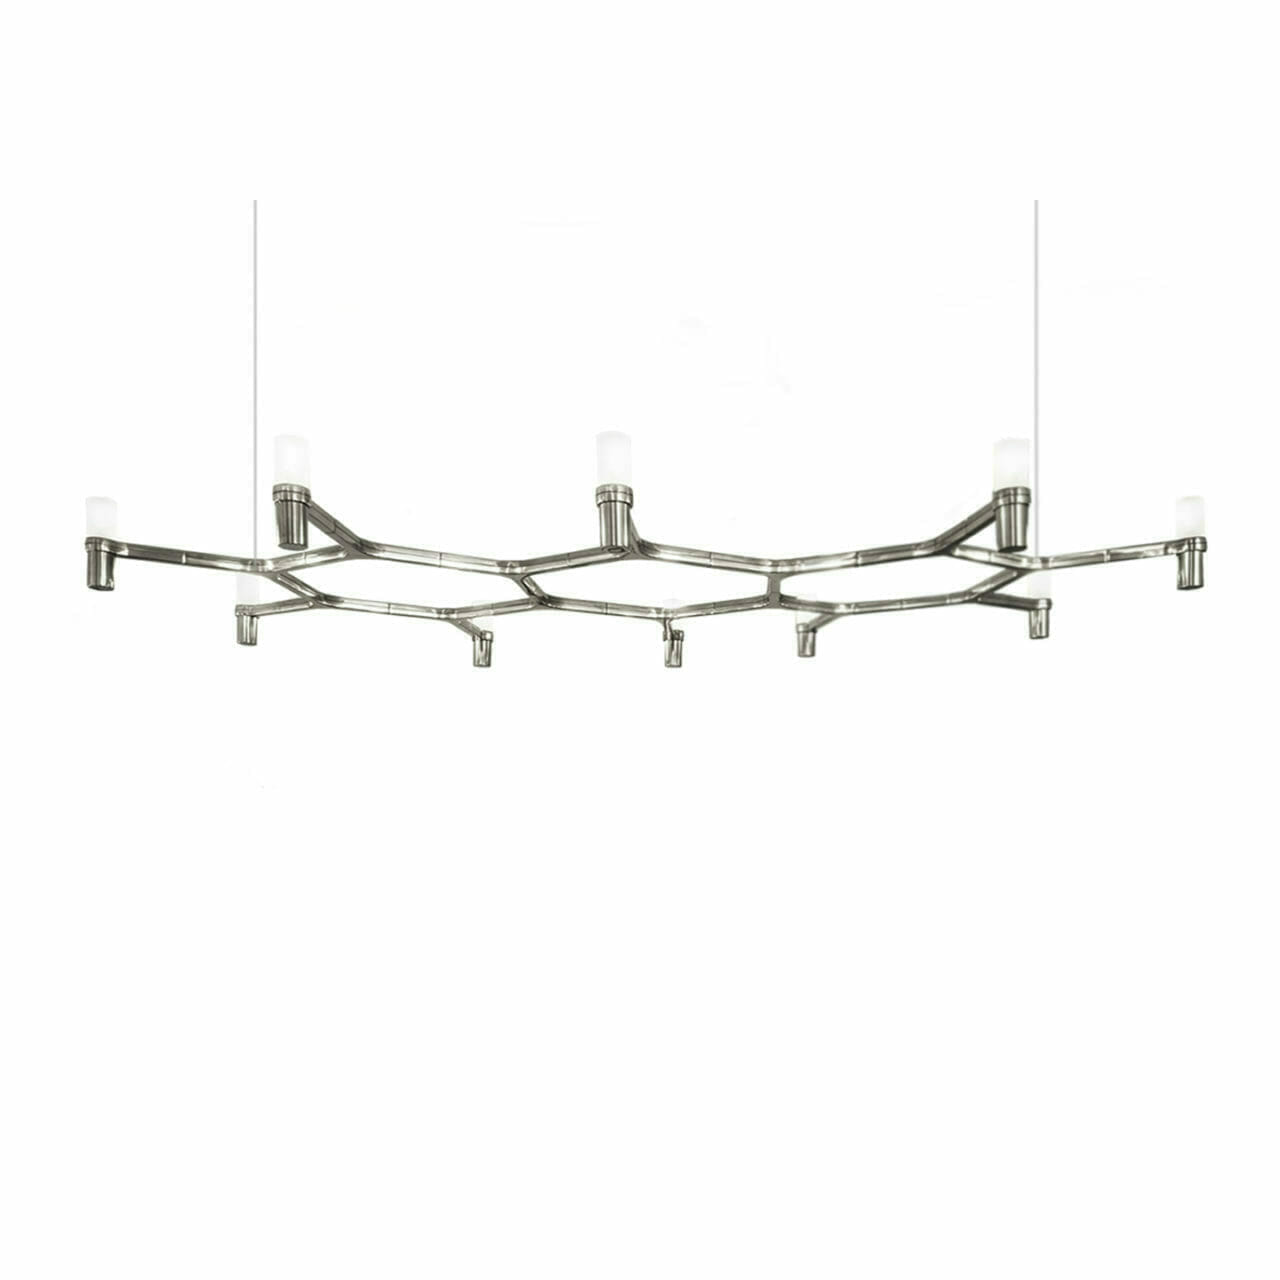 Crown Plana Pendant Light by Olson and Baker - Designer & Contemporary Sofas, Furniture - Olson and Baker showcases original designs from authentic, designer brands. Buy contemporary furniture, lighting, storage, sofas & chairs at Olson + Baker.